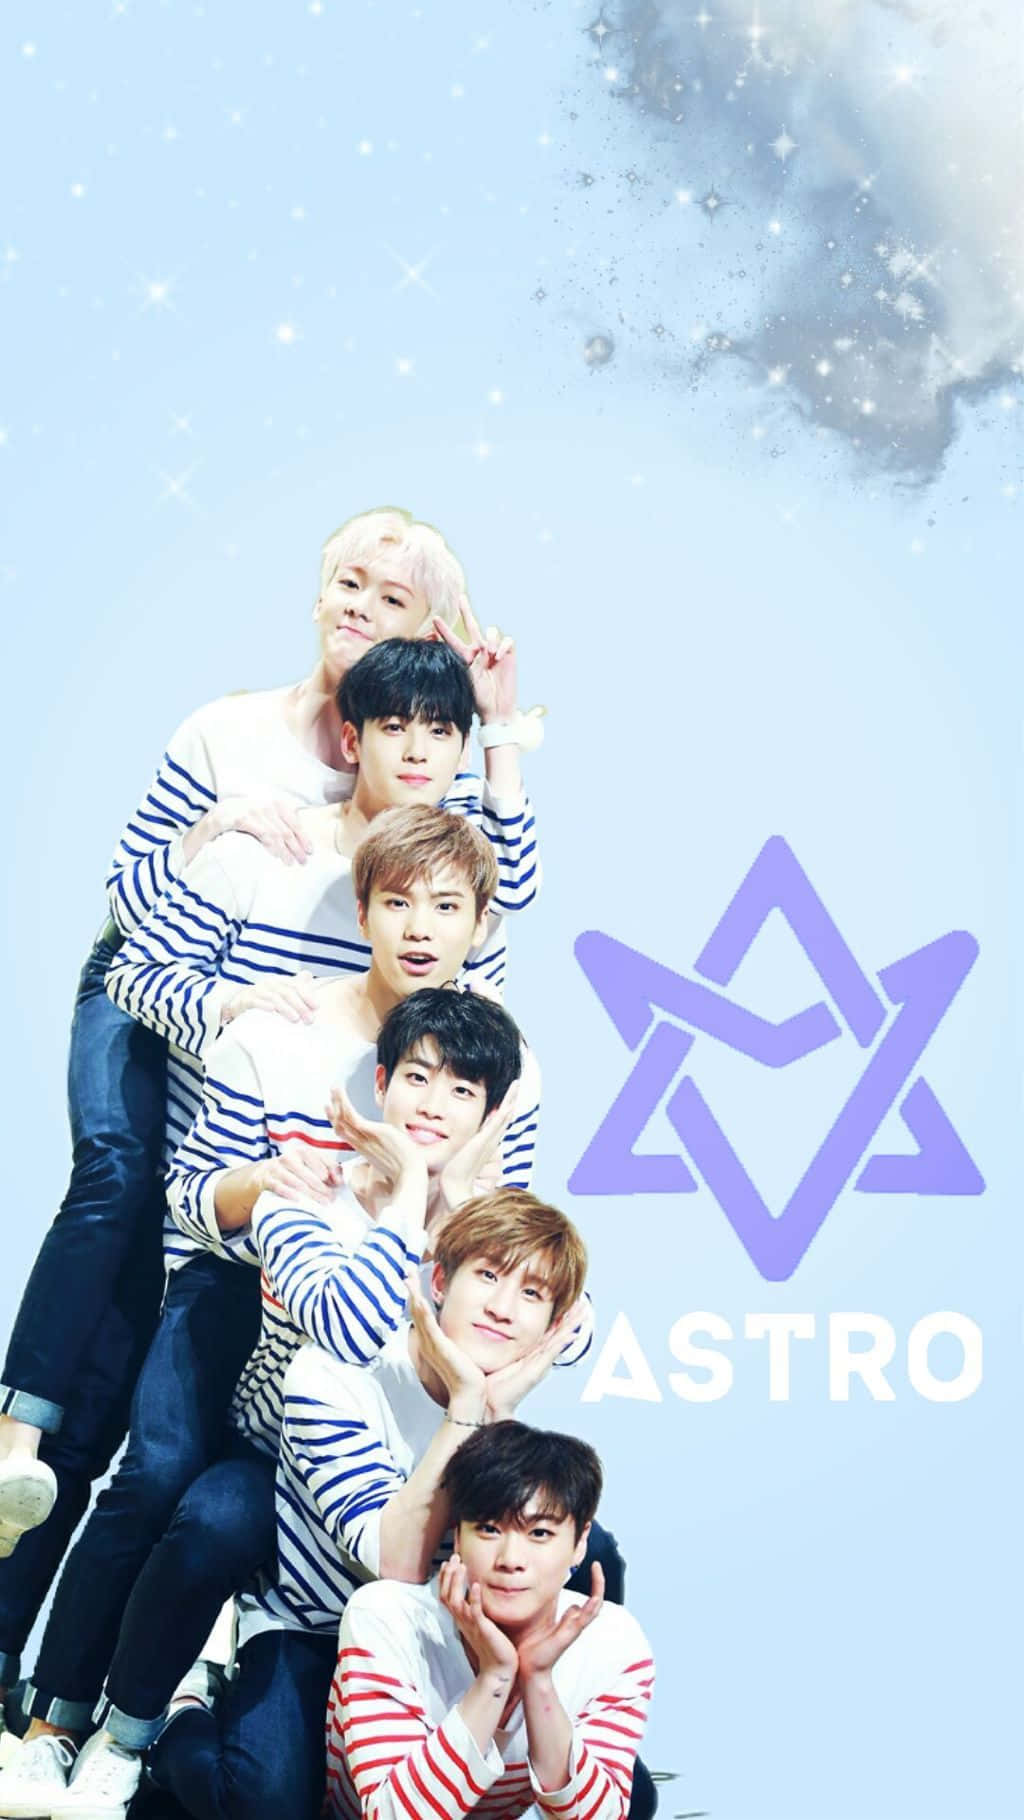 Astro Kpop Group Posewith Logo Wallpaper